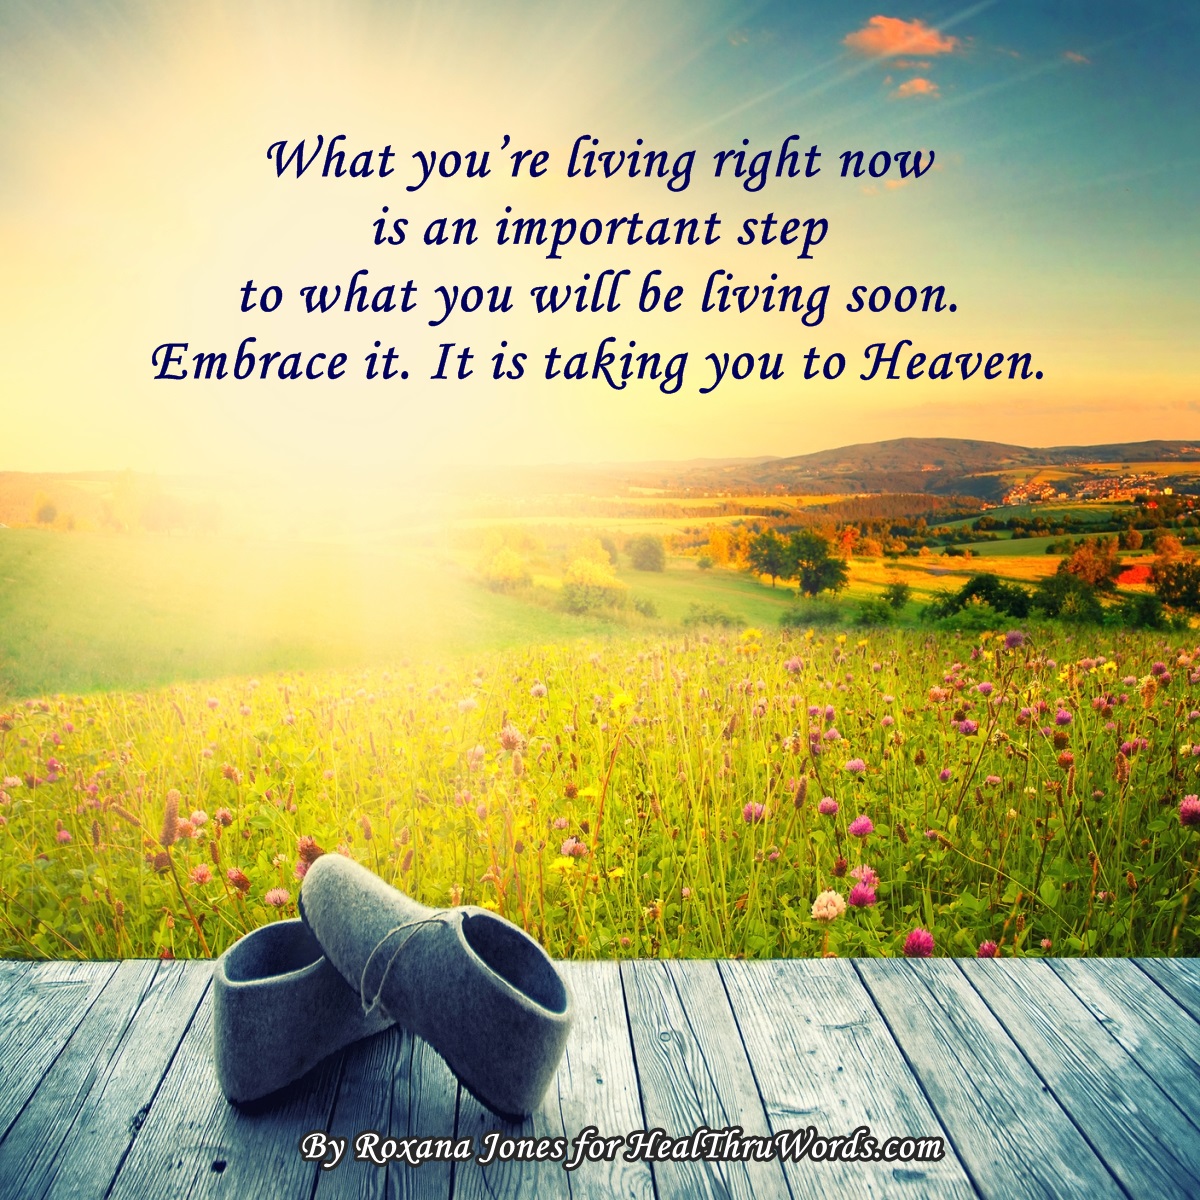 what you're living right now is an important step to what you will be living soon. embrace it. it is taking you to heaven